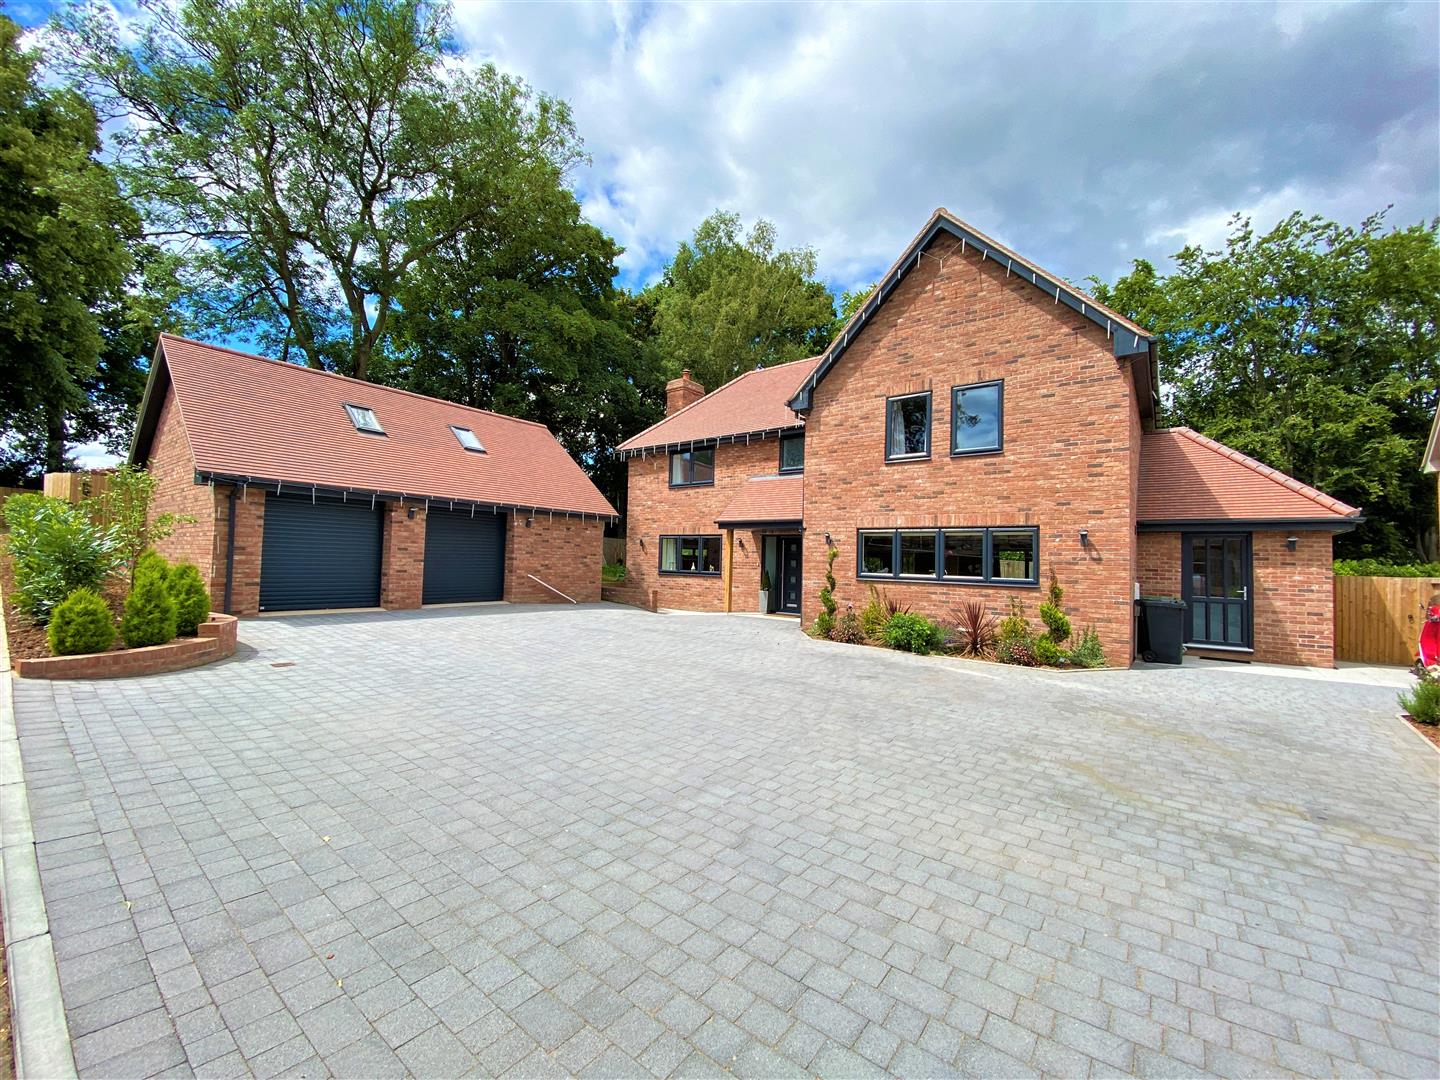 5 bed detached for sale in Moreton-On-Lugg, HR4